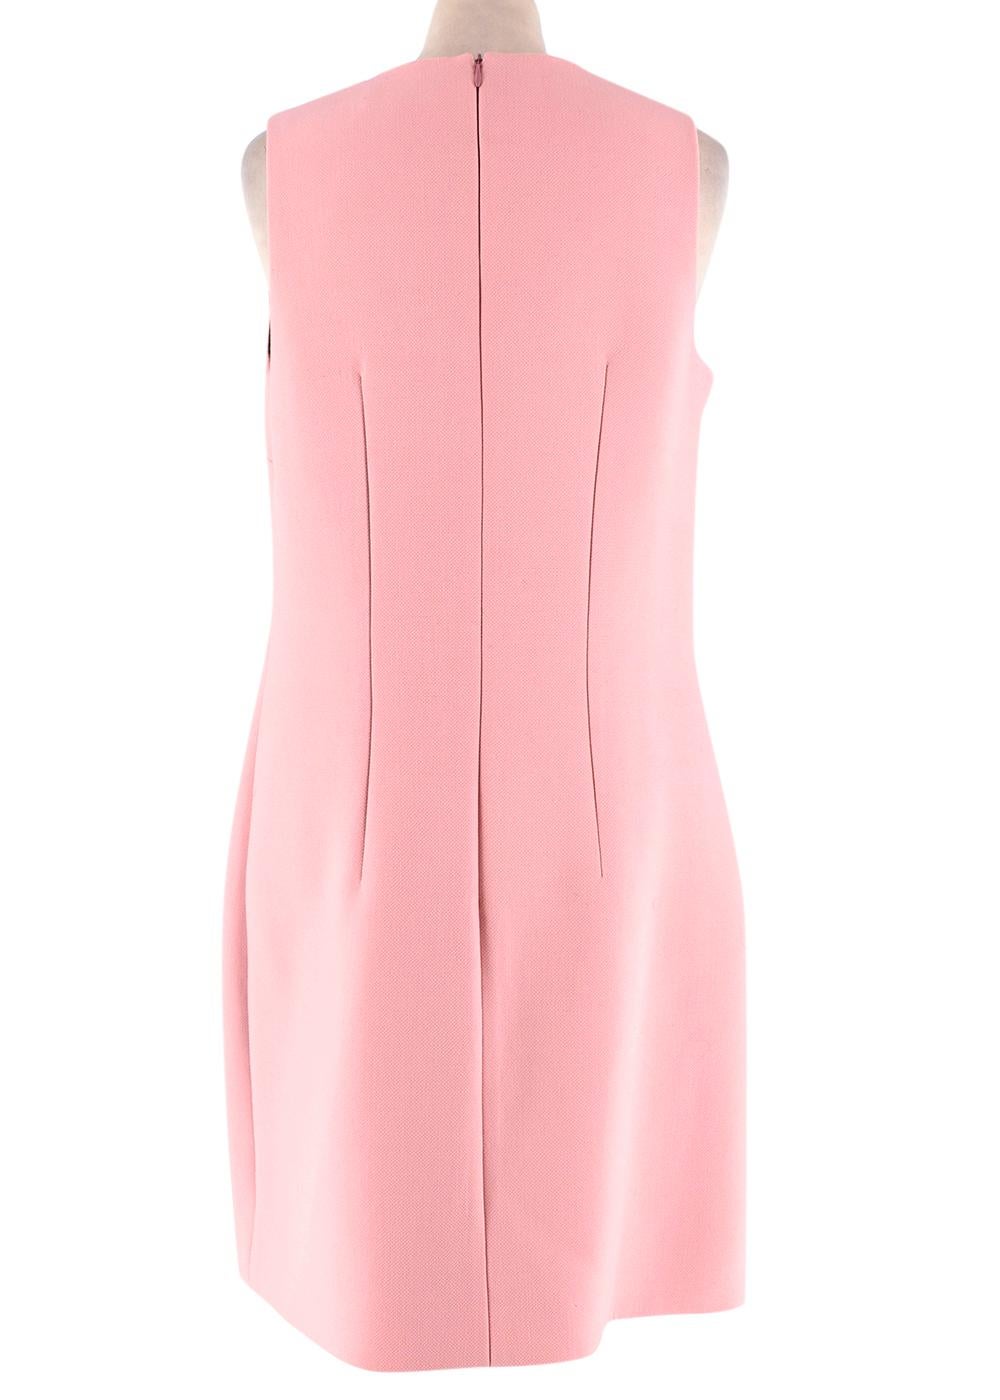 Peter Pilotto Pink Embellished Sleeveless Wool Crepe Shift Dress - Size US 8 In New Condition For Sale In London, GB